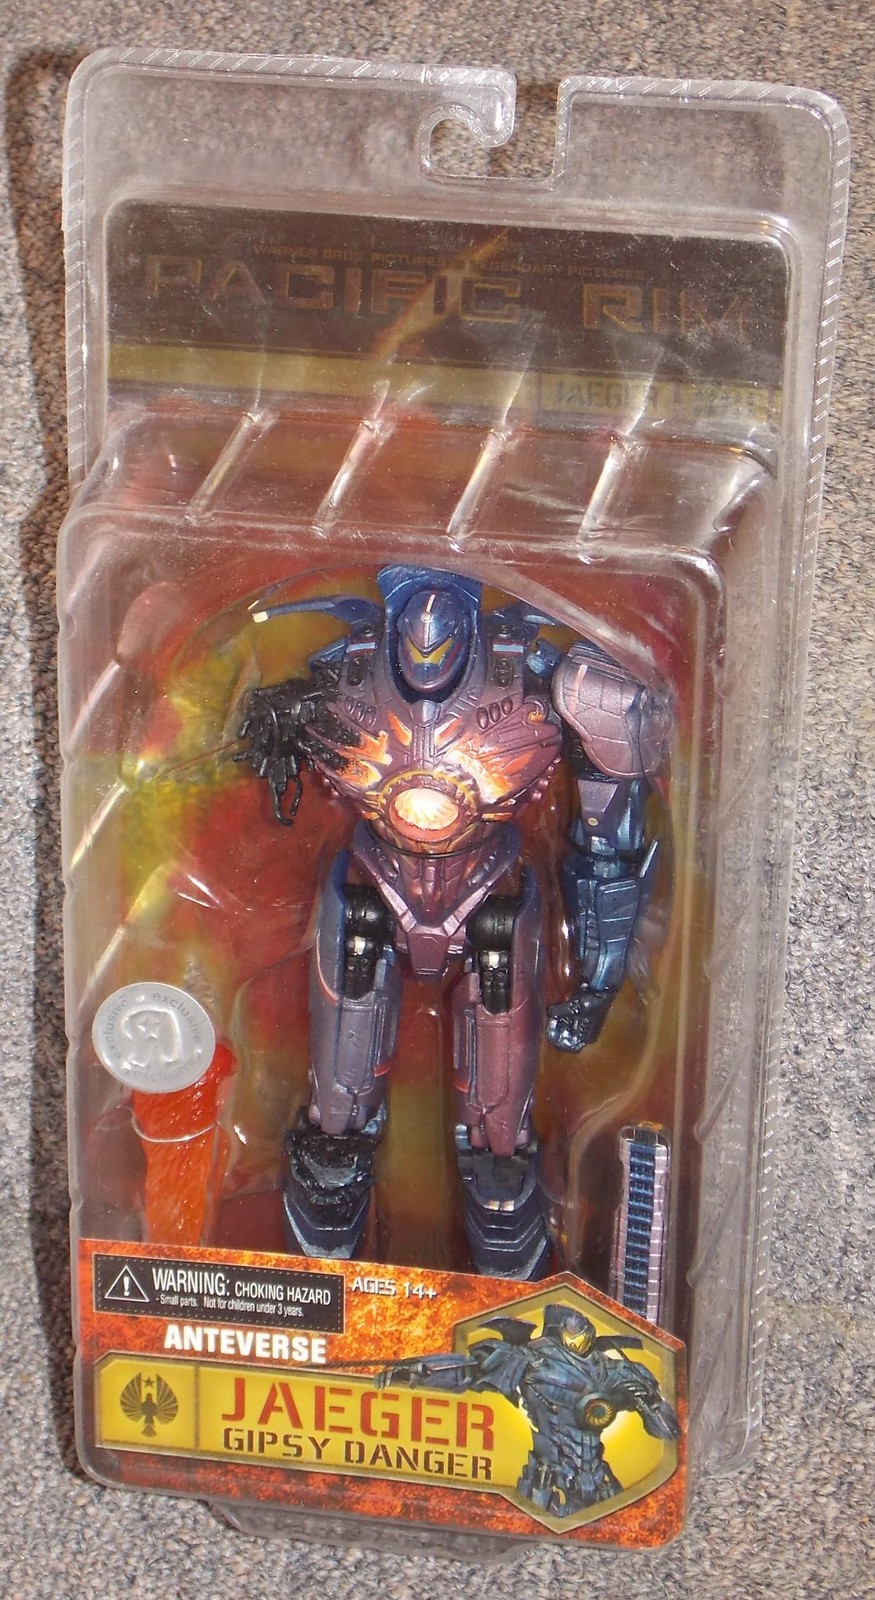 Primary image for NECA 2015 Pacific Rim Jaeger Gipsy Danger 7 inch Figure New In Package Toys R US